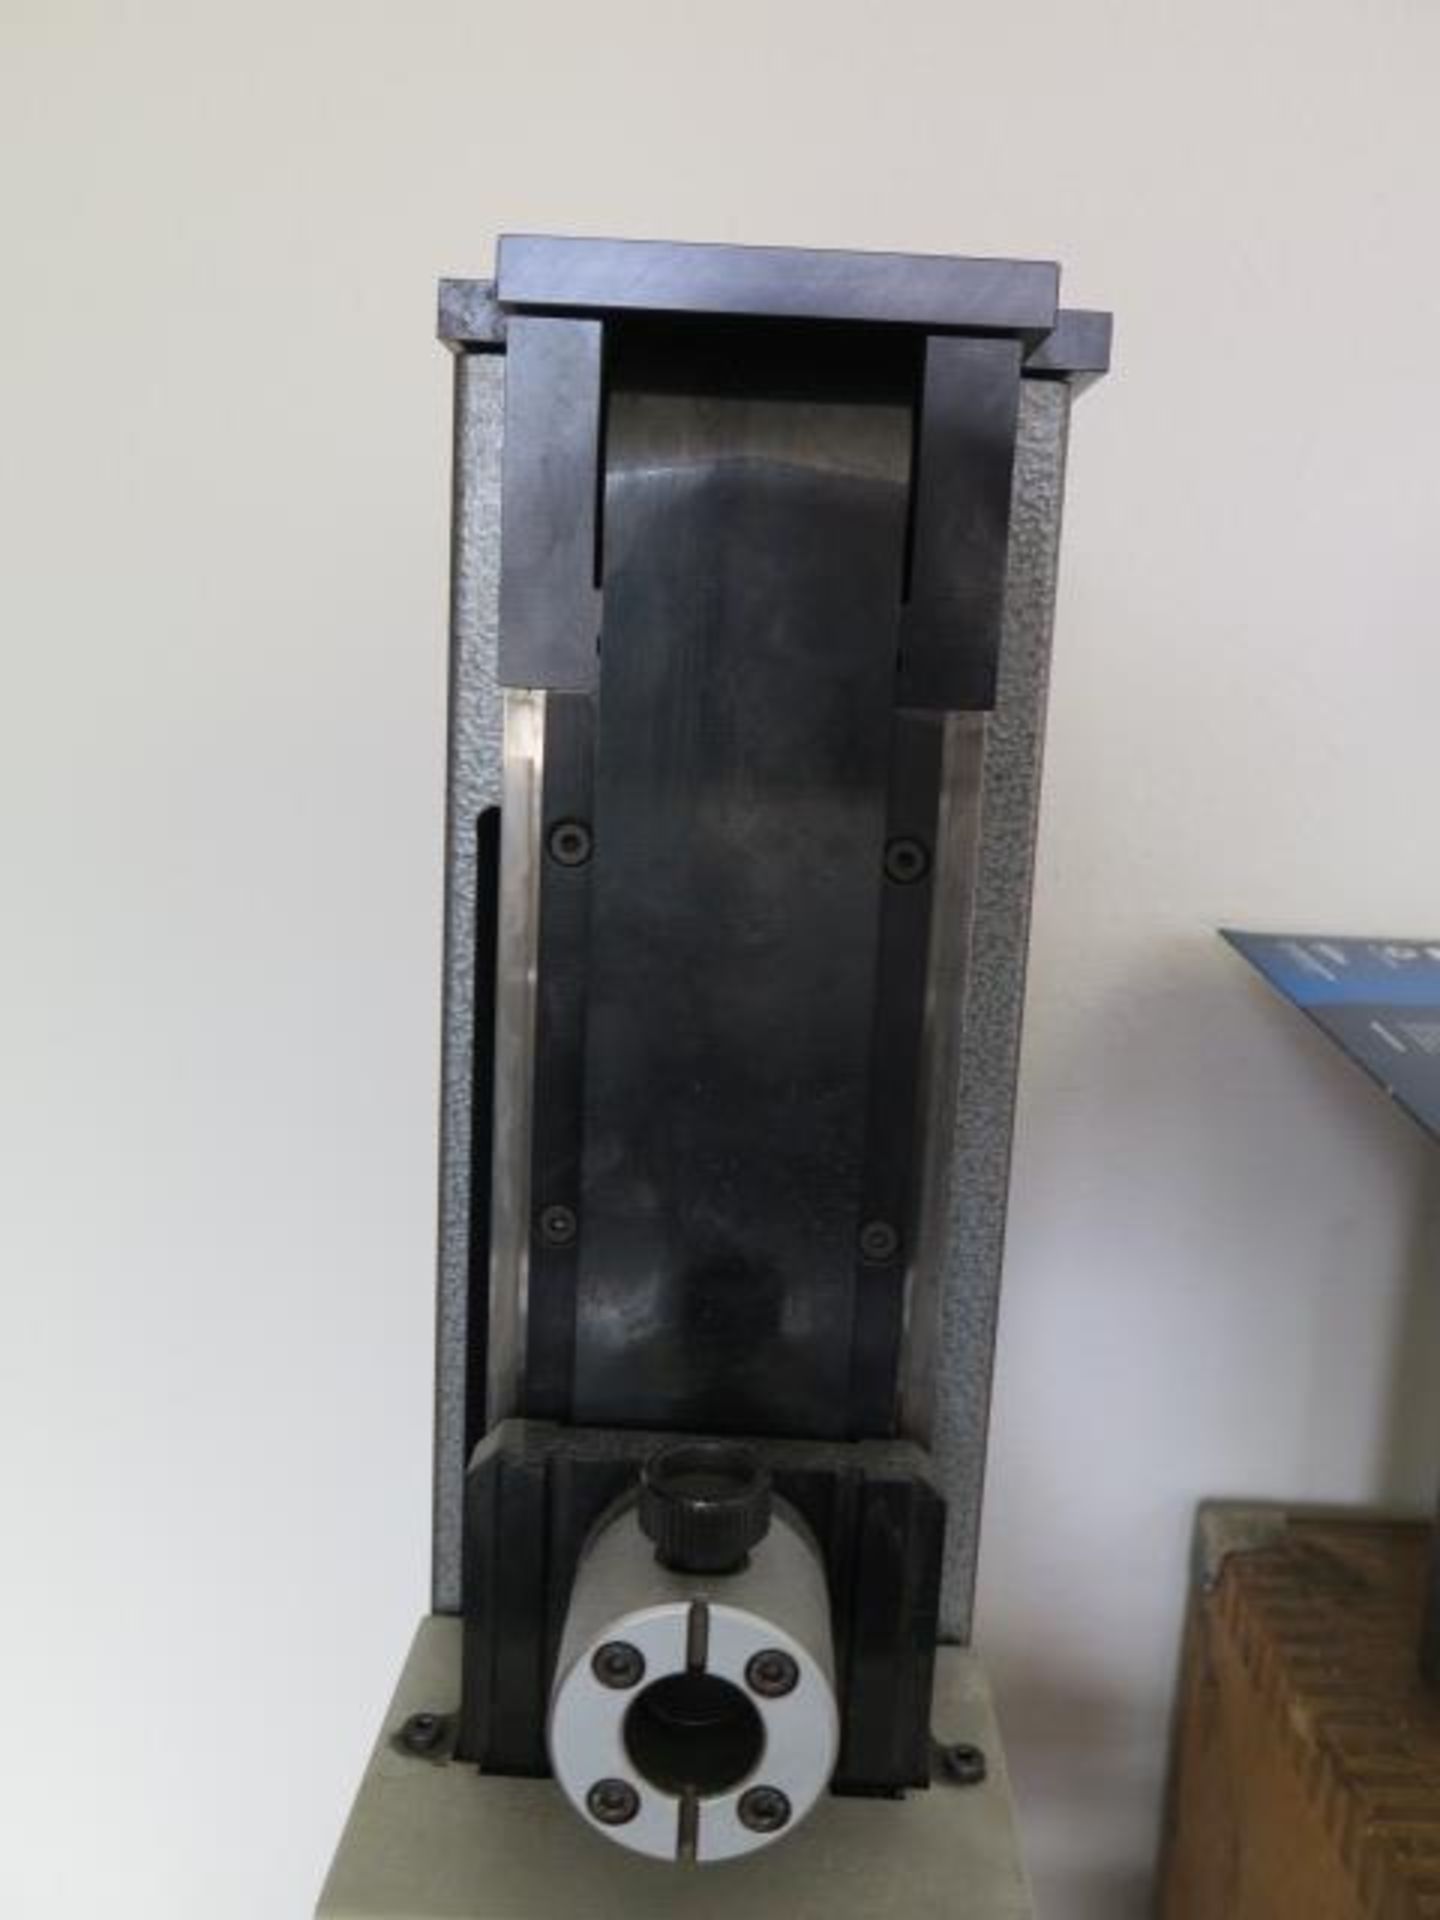 Fowler Trimos "Vertical 500" 19" Digital Height Gage (SOLD AS-IS - NO WARRANTY) - Image 4 of 8